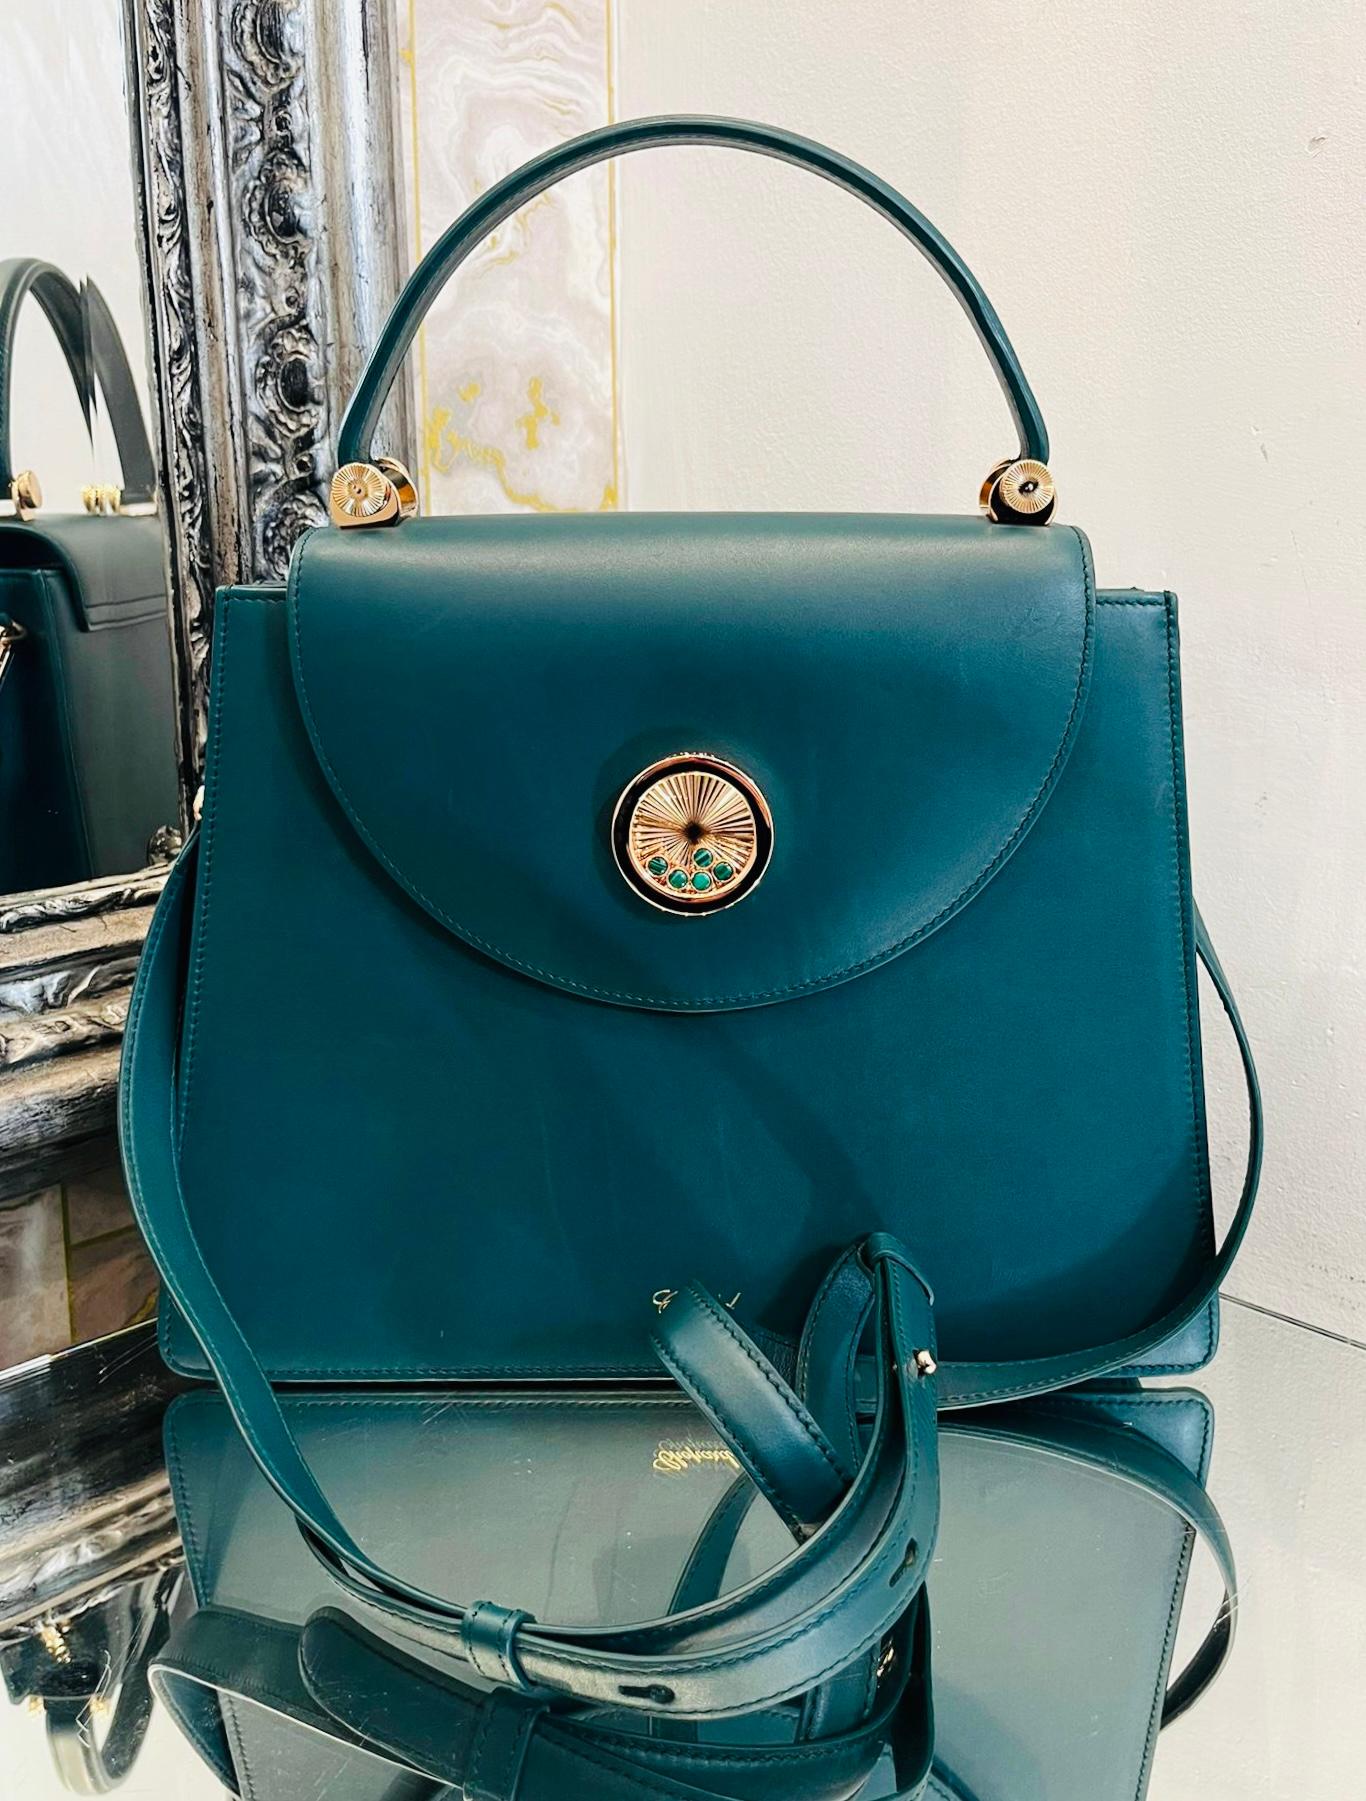 Chopard Happy Lady Leather Bag

Teal green handbag designed with front magnetic flap and single top handle.

Detailed with the brand's signature rose gold, round embellishment with moving emerald cabochons and 'Chopard' engravement.

Featuring